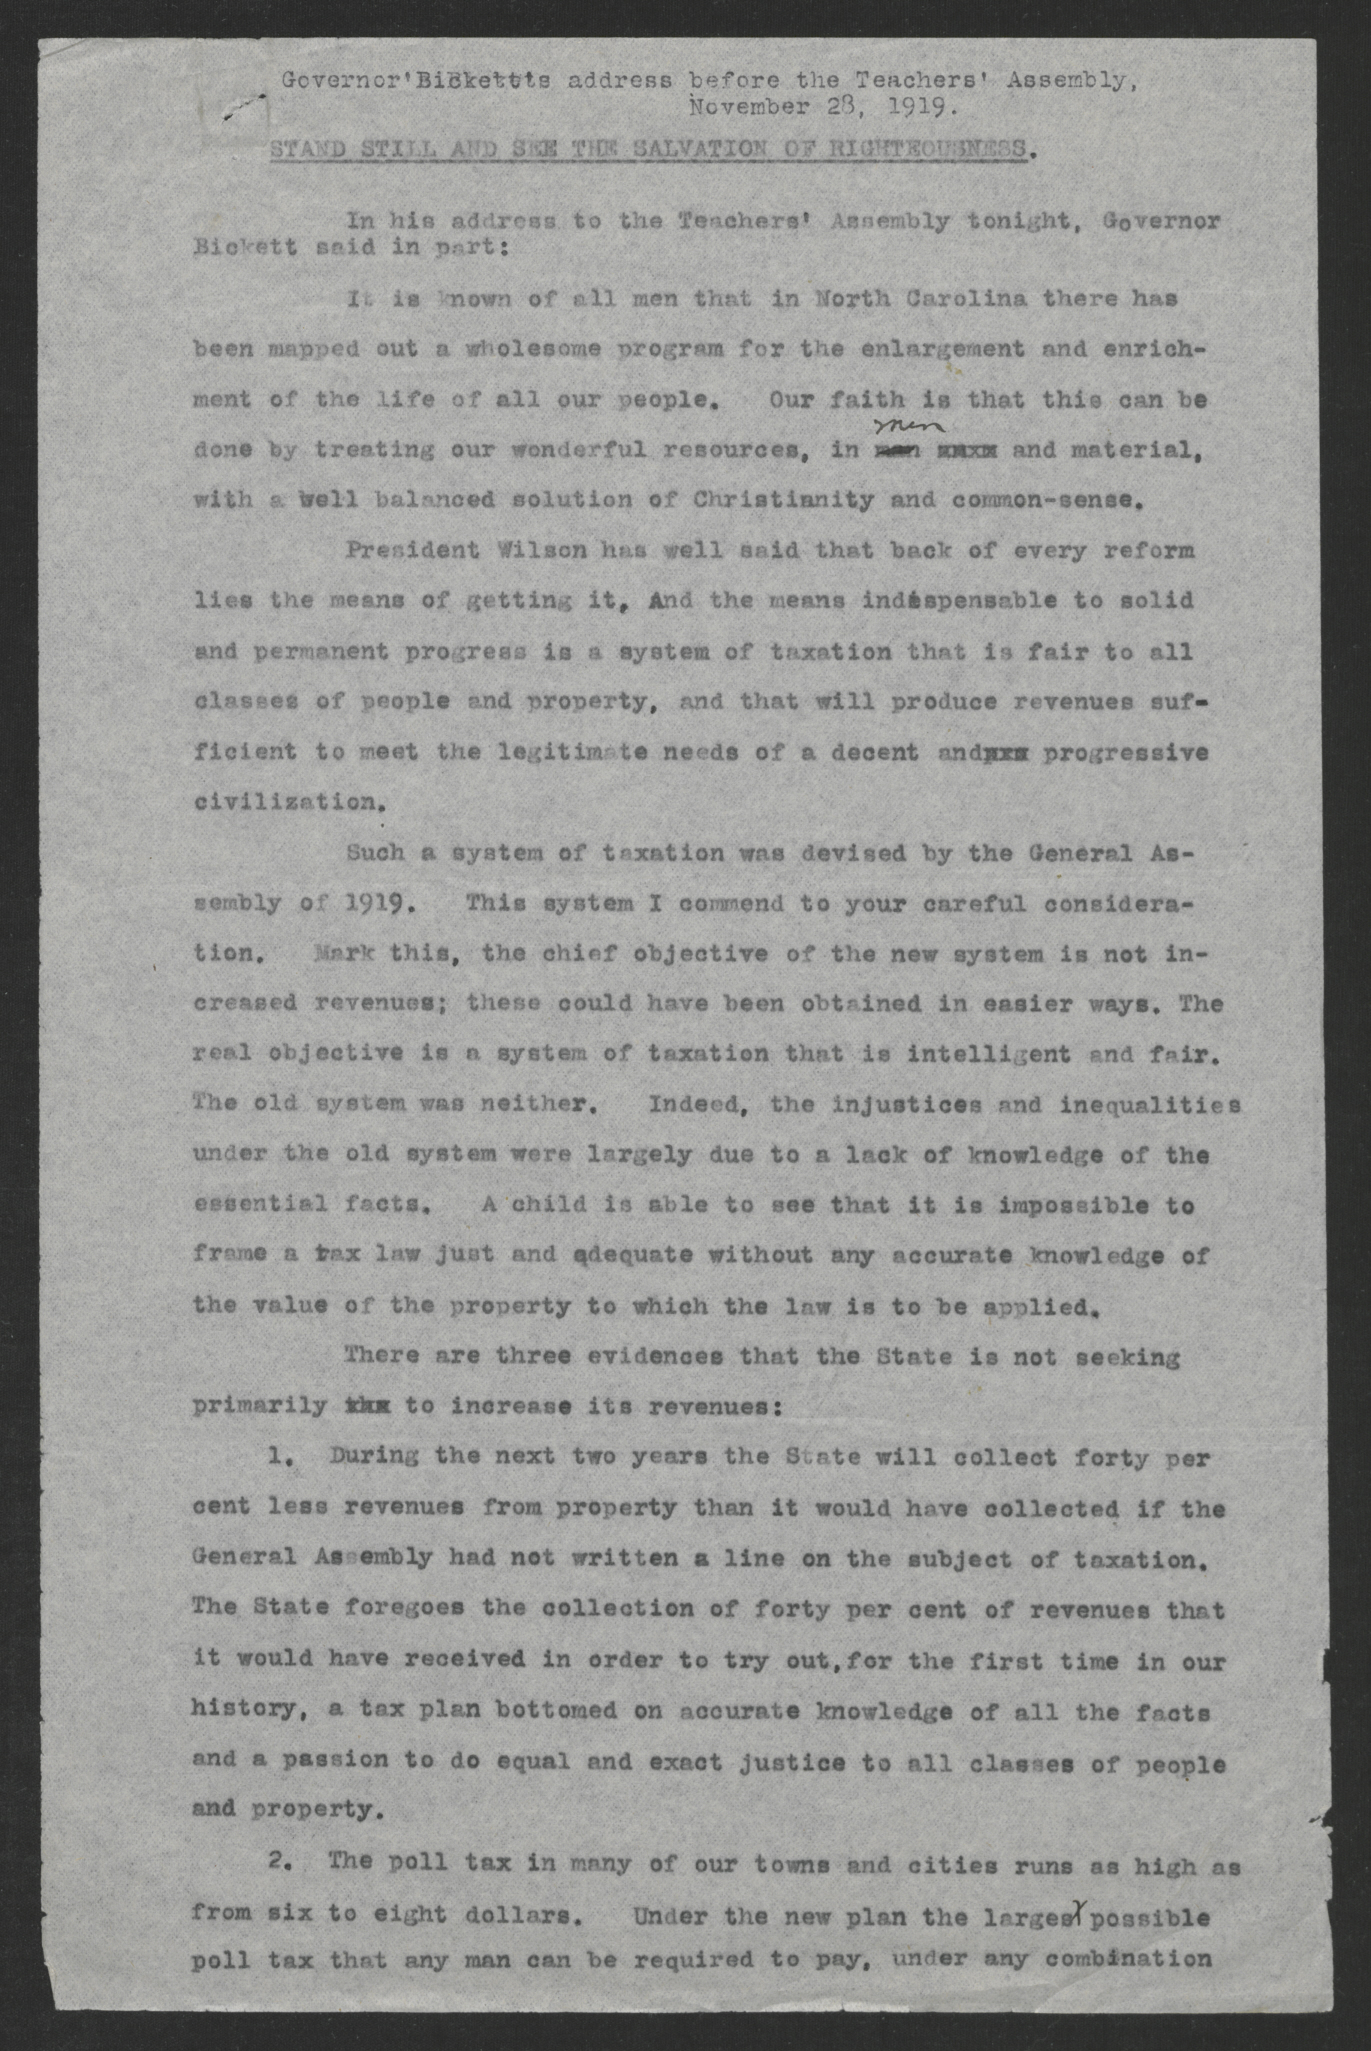 Address Before the Teachers' Assembly by Governor Thomas W. Bickett, November 28, 1919, page 1